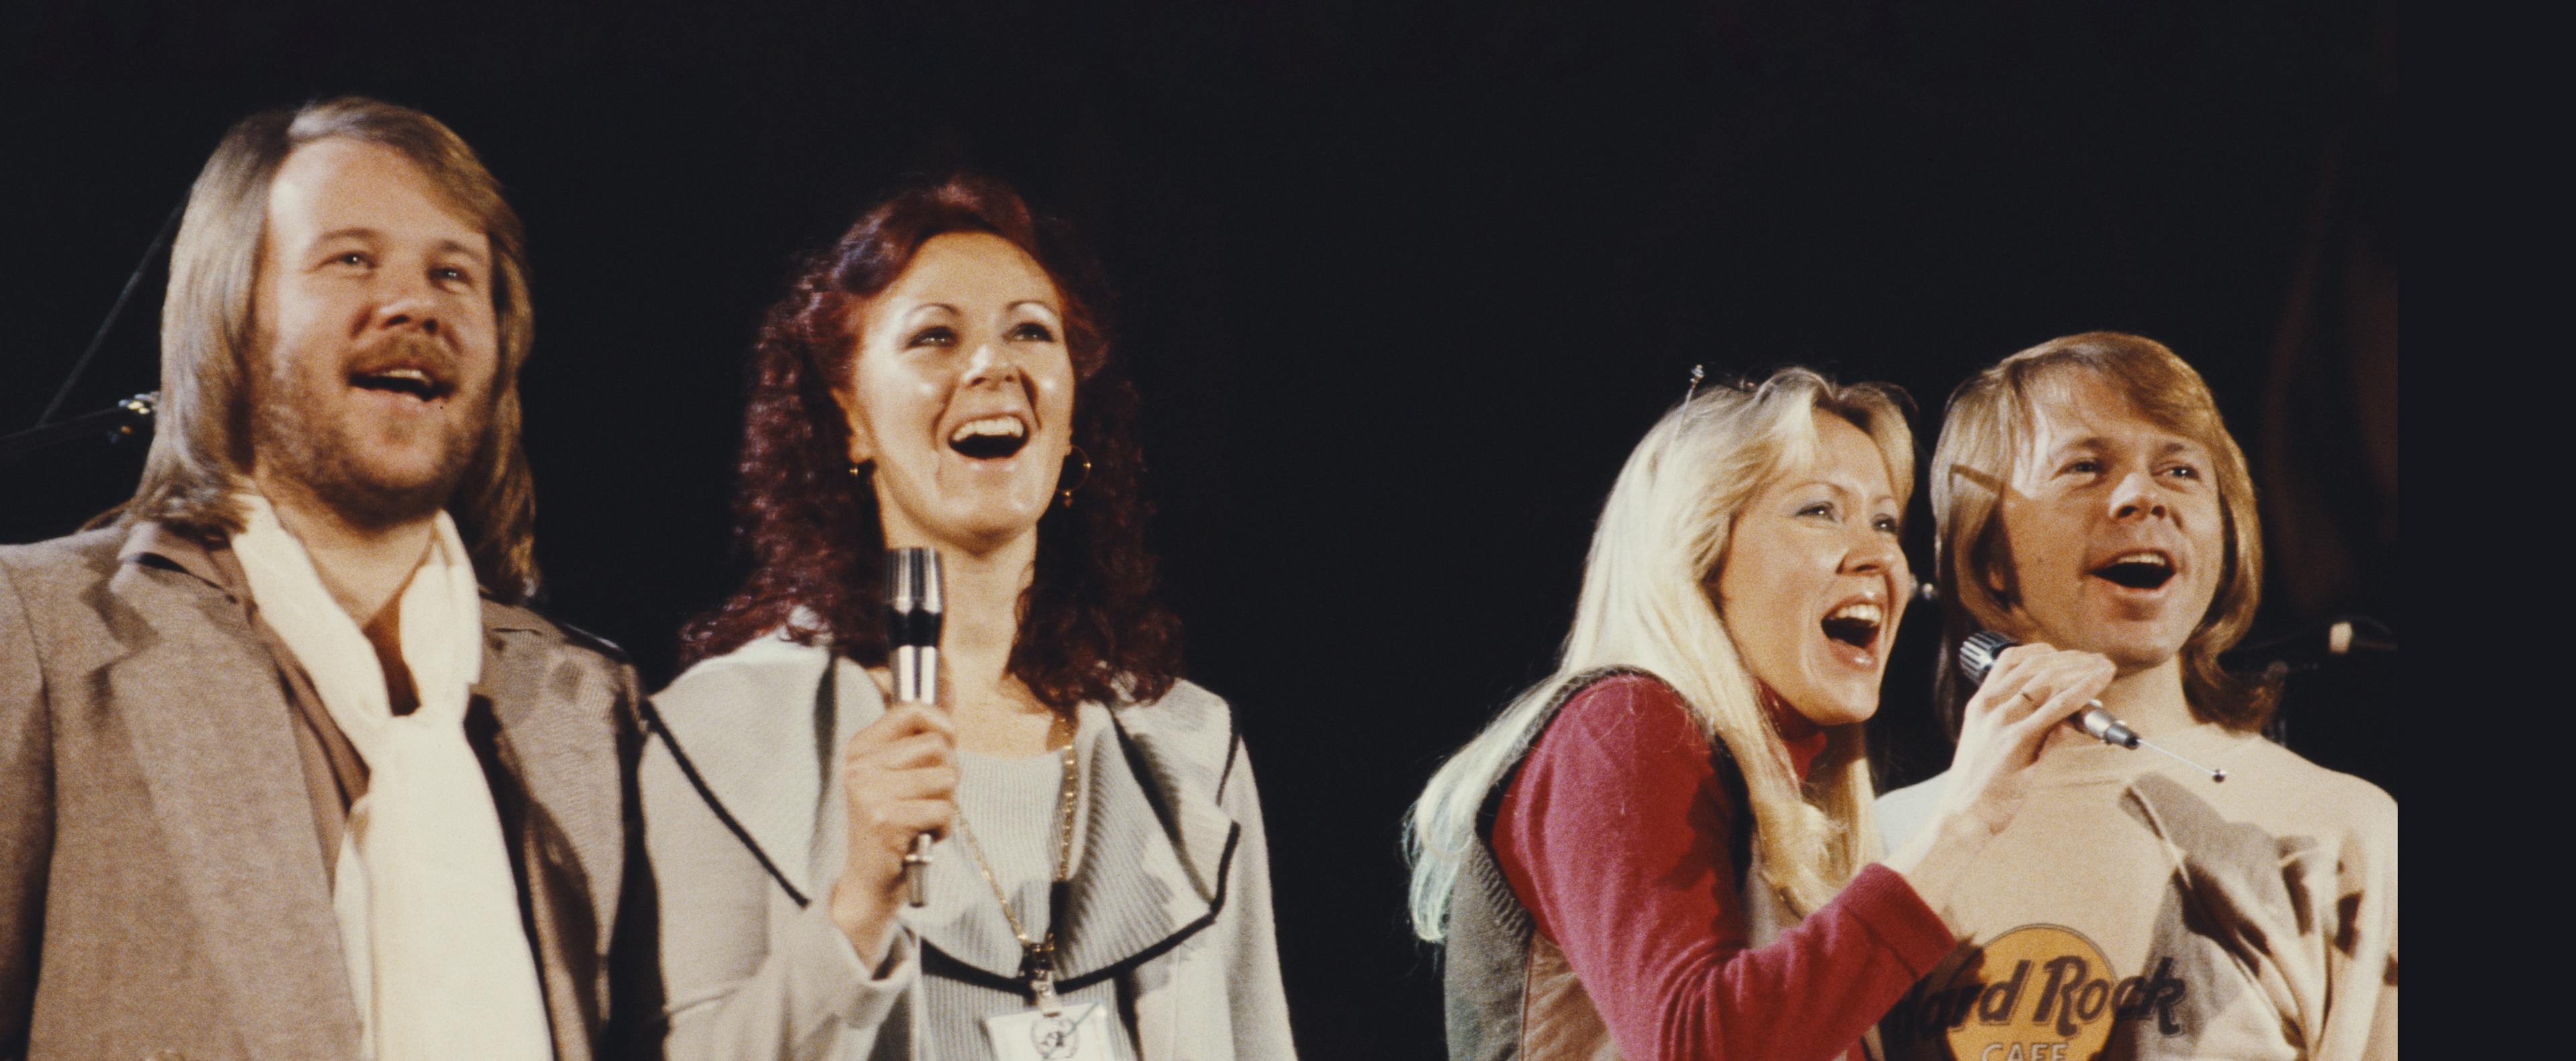 Abba 1979 - cropped for desktop